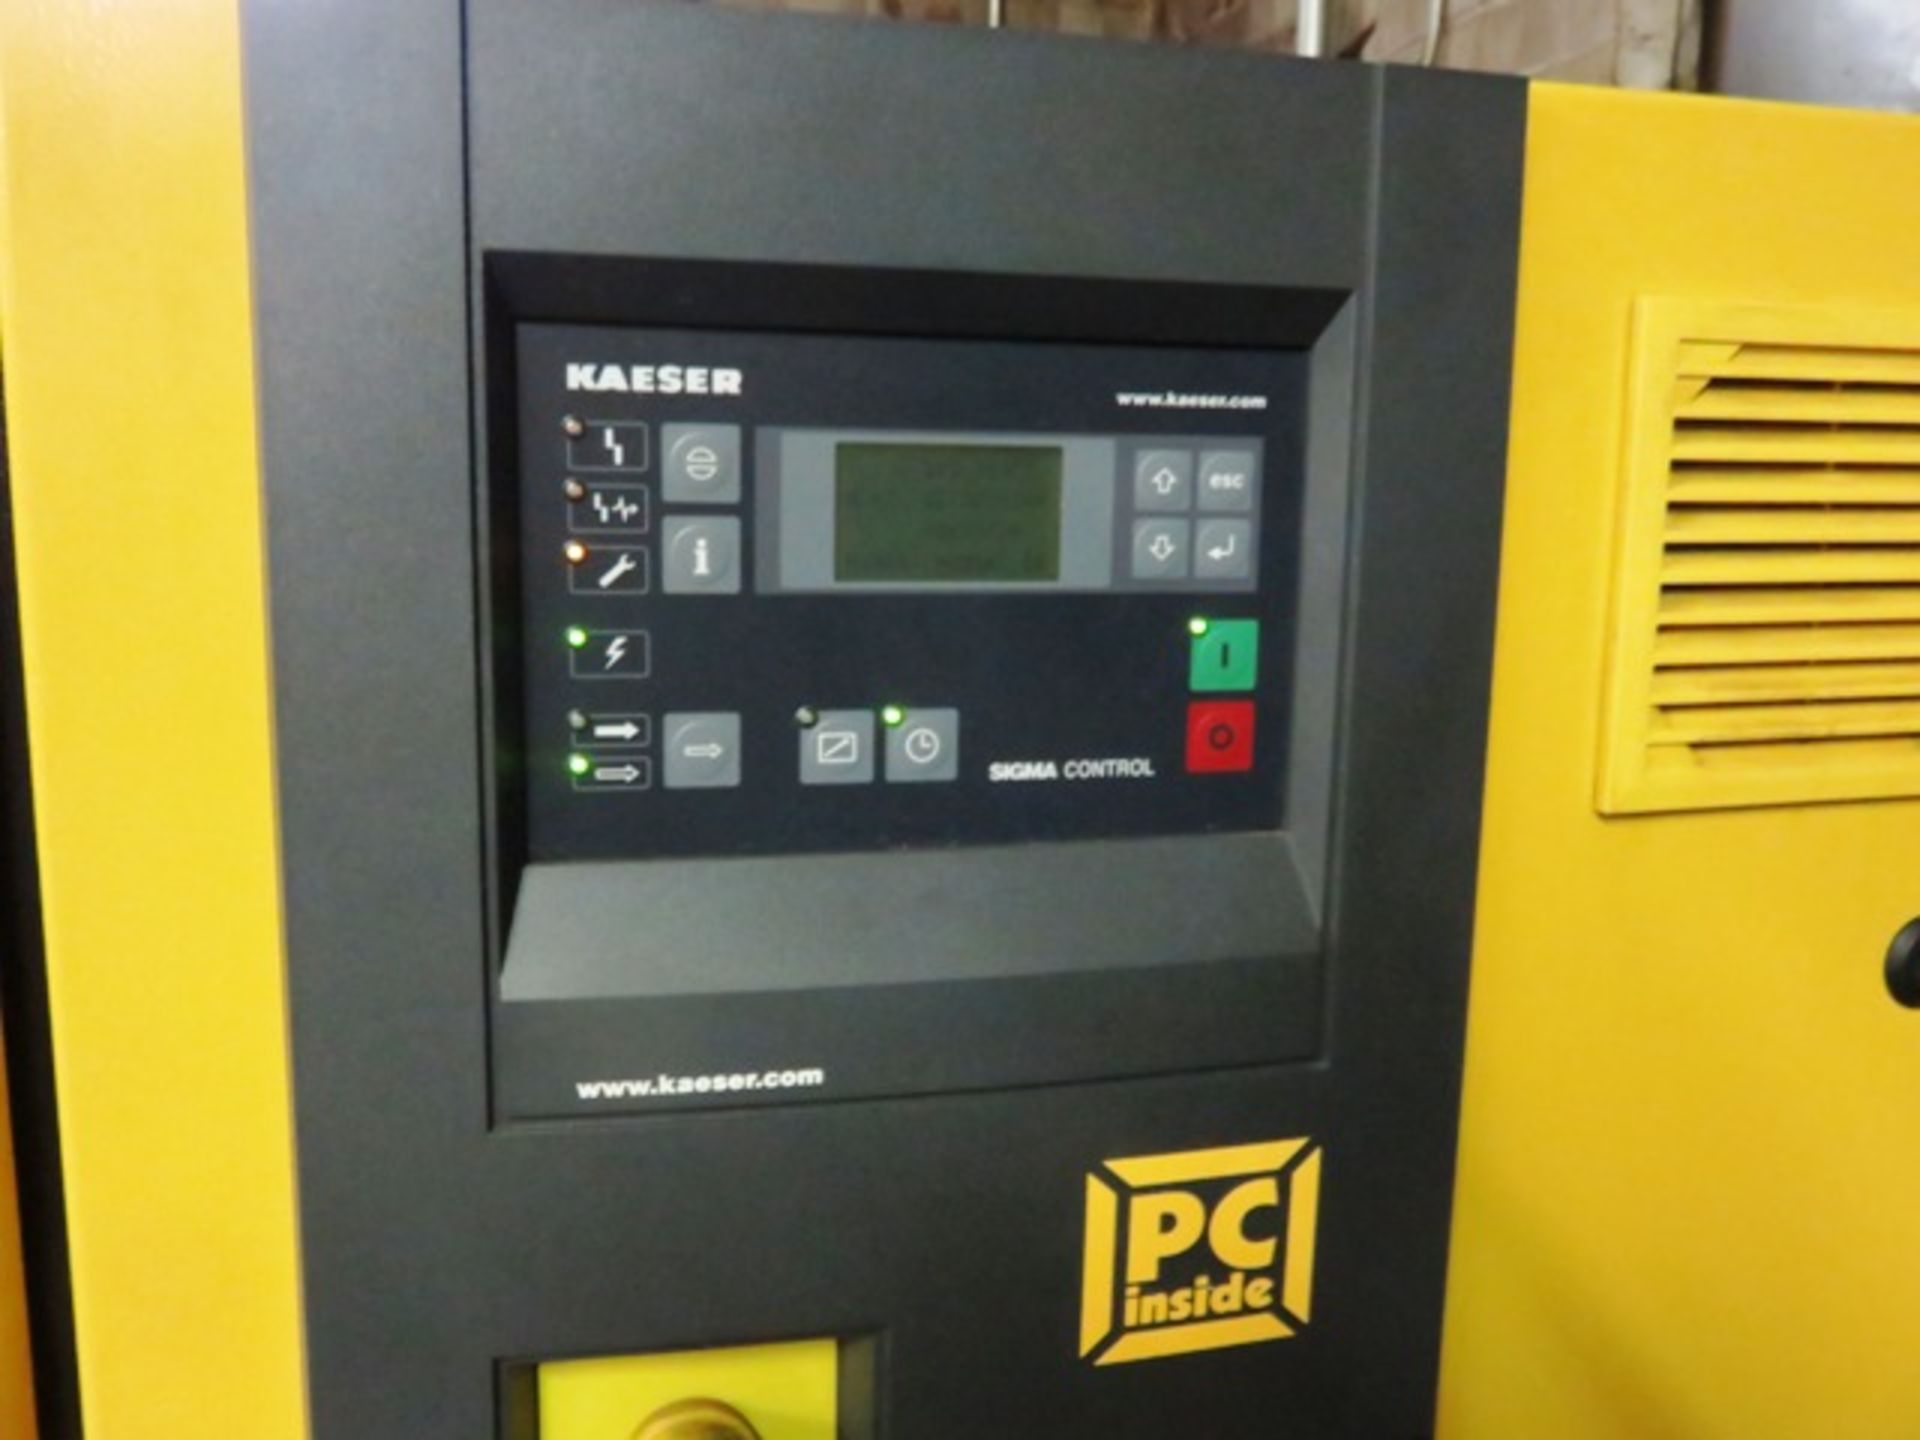 Kaeser Model ASD40S Rotary Air Compressor with Sigma PC Control, 40 HP, sn:1164, mfg.2008 - Image 2 of 2